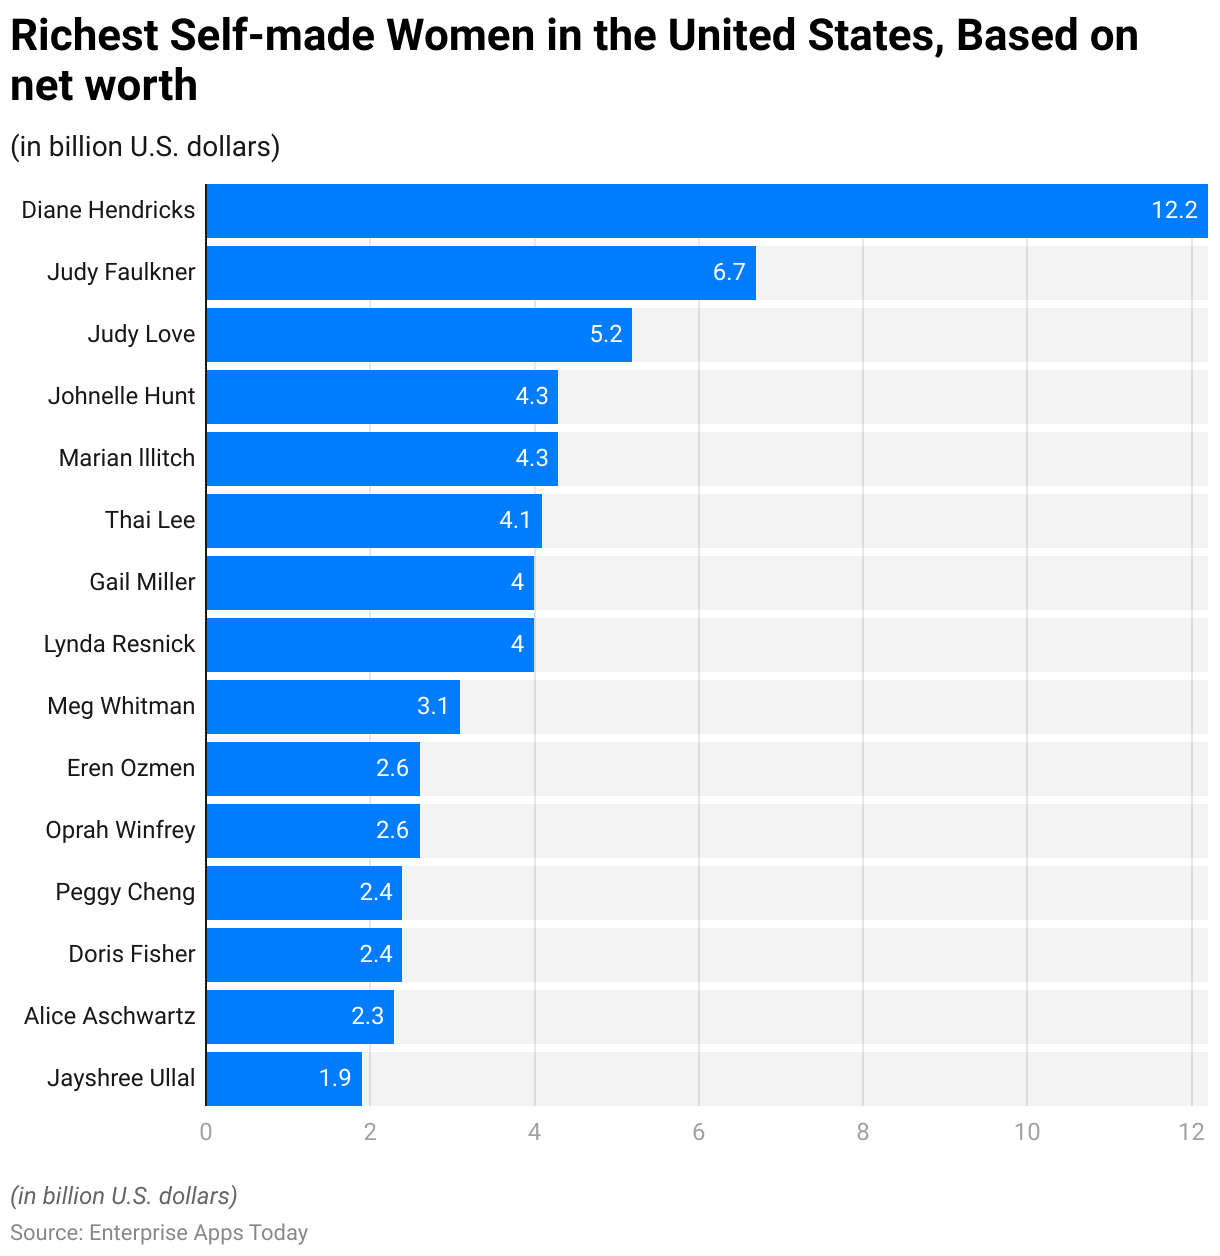 Richest Self-made Women in the United States, Based on net worth 